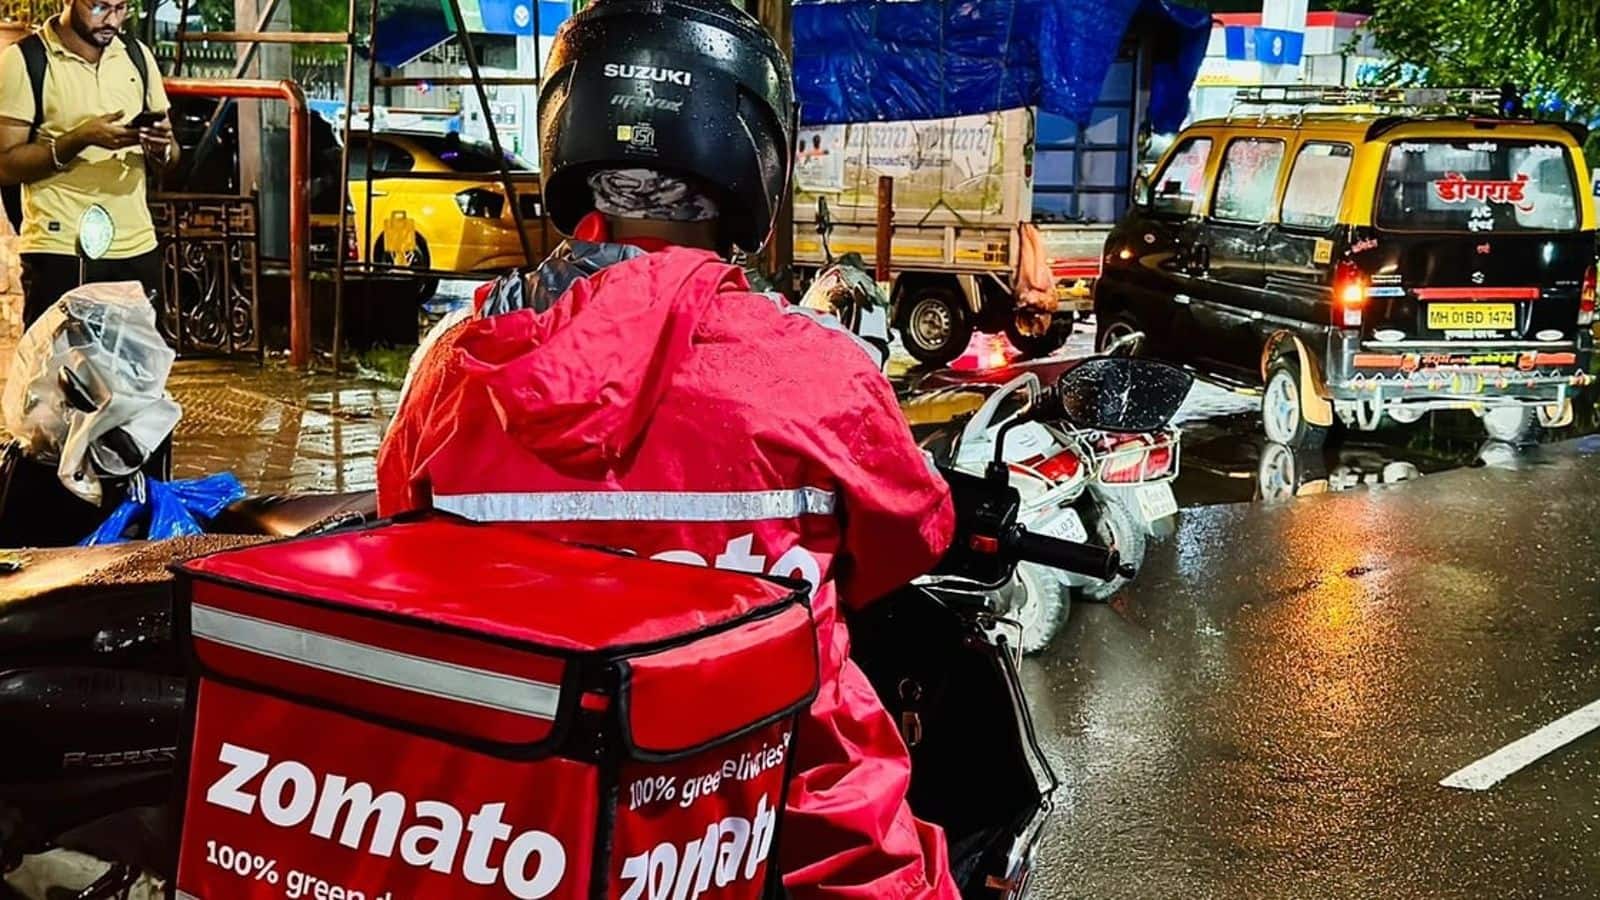 Zomato achieves biggest ever order volume on Mother's Day